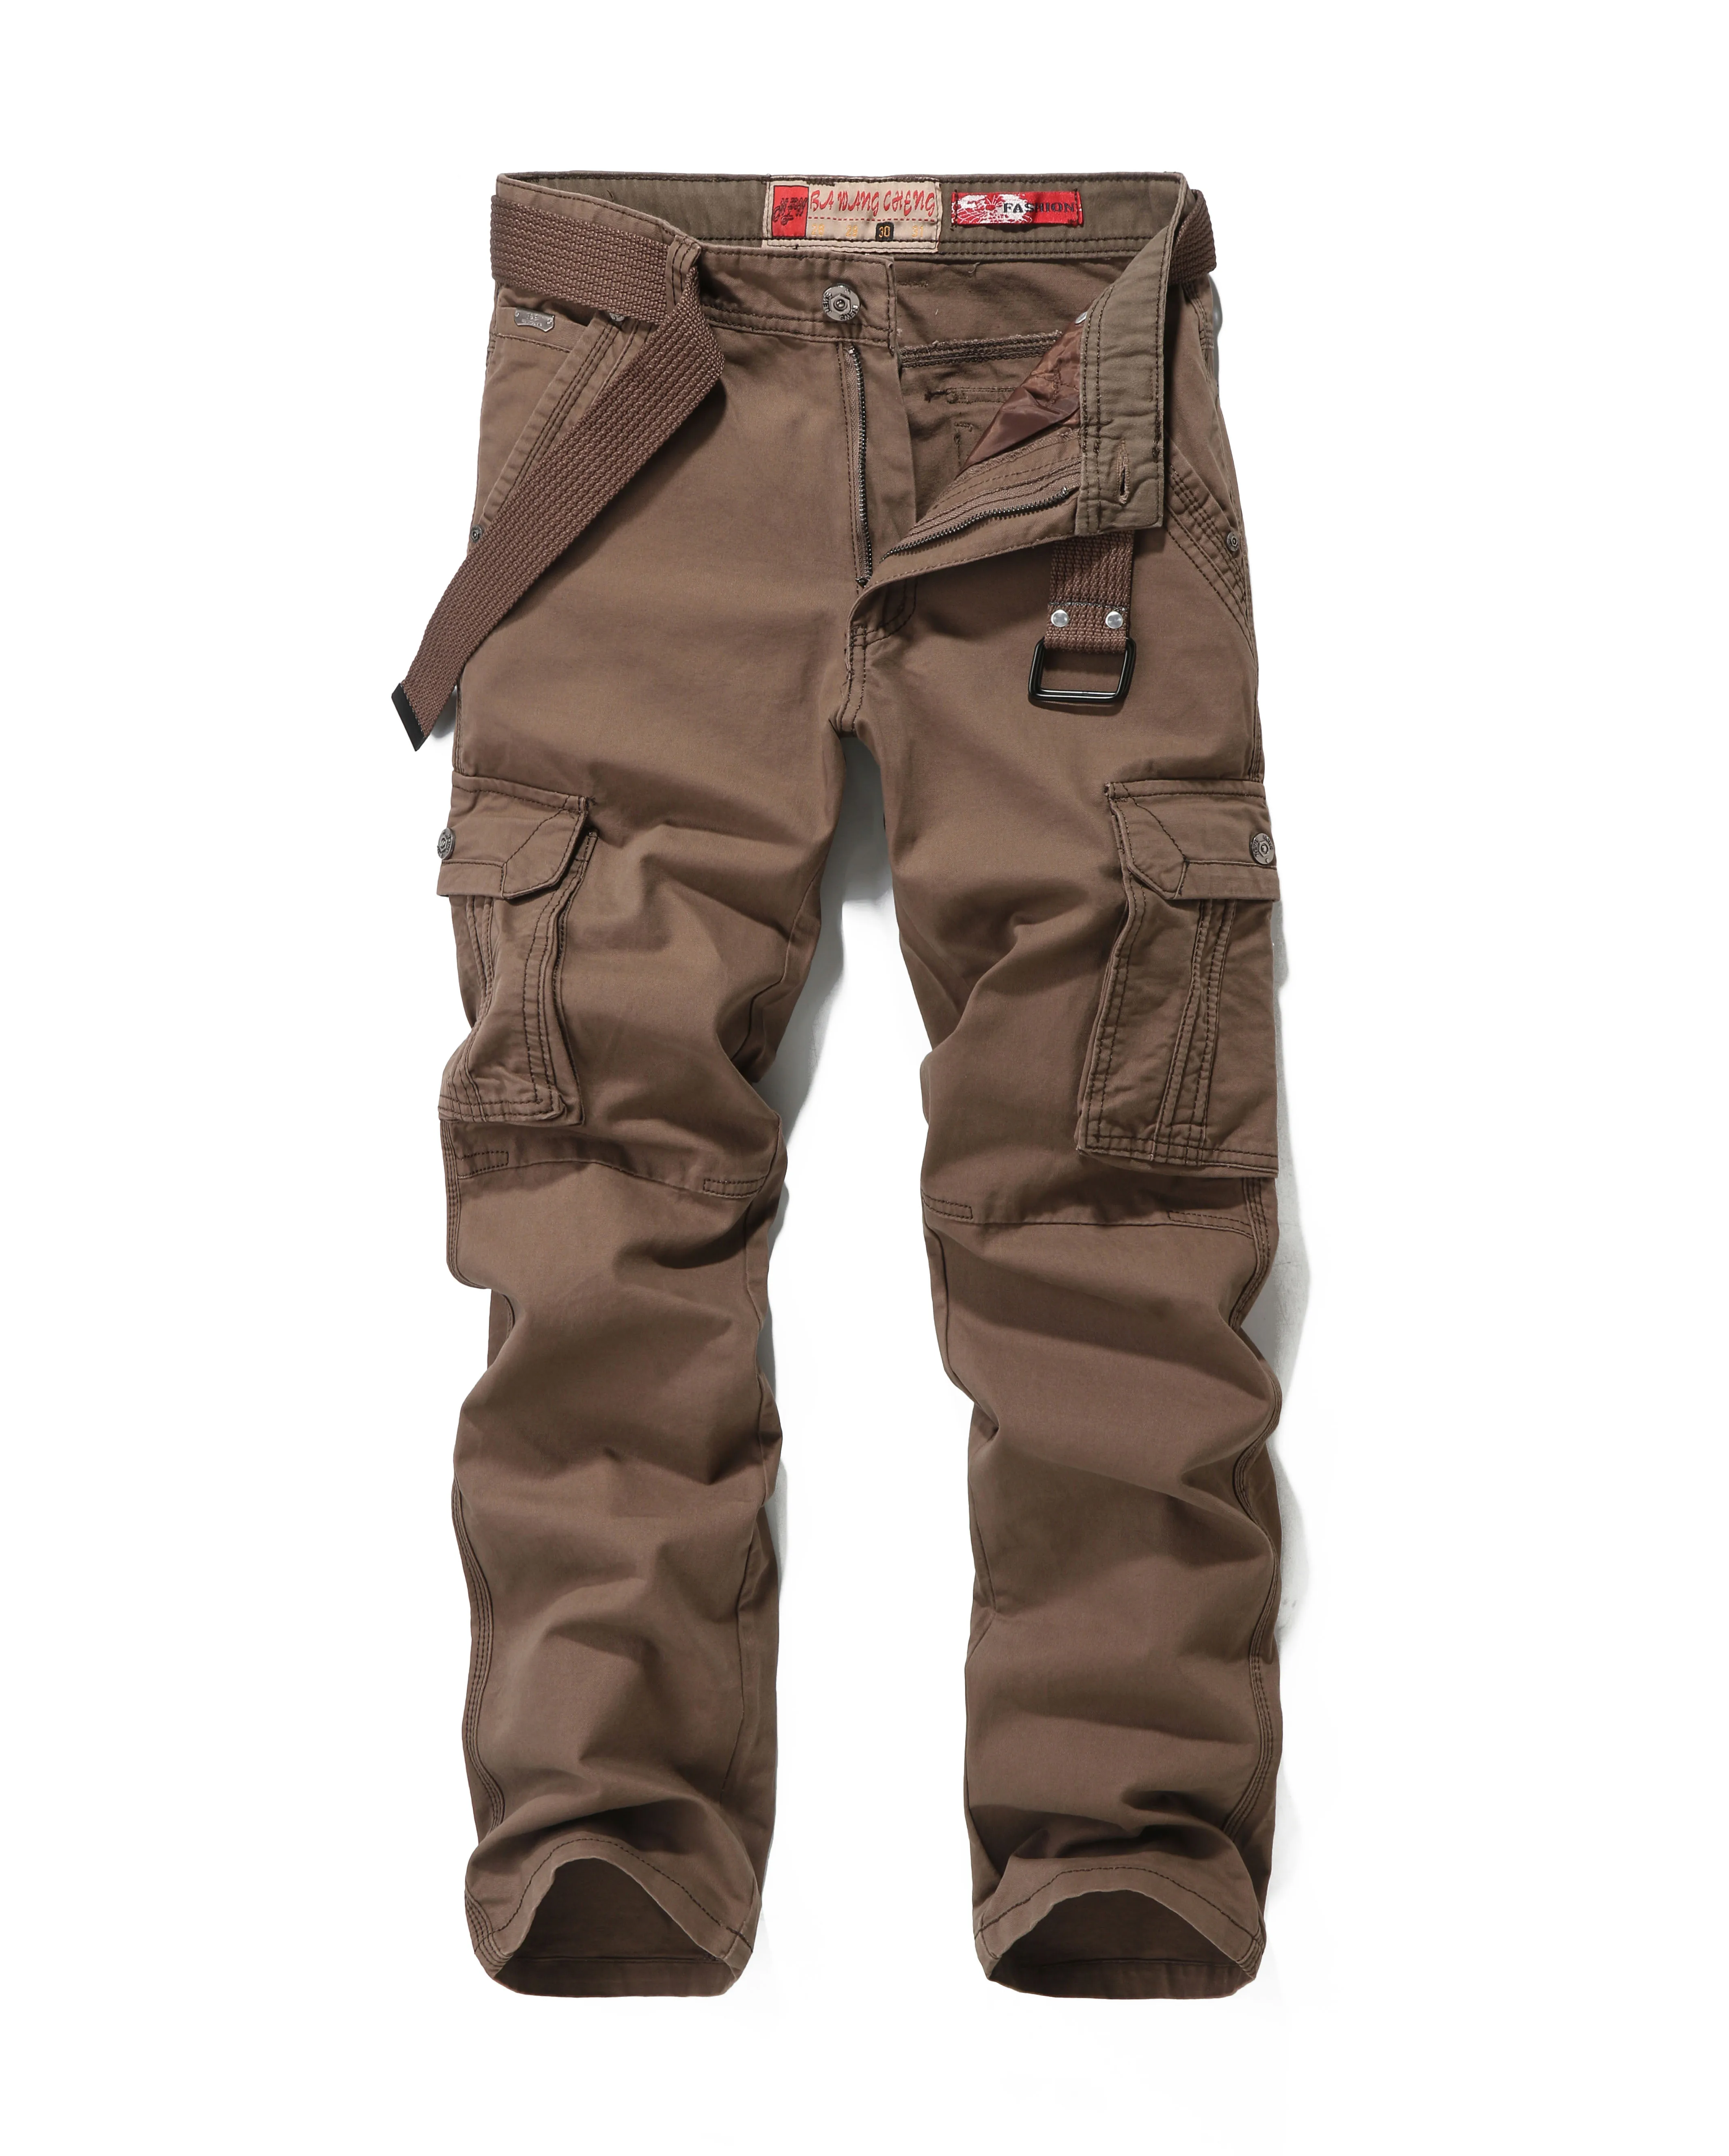 FALIZA Military Style Tactical Cheap Cargo Pants Mens For Men Multi  Pockets, Straight Style, Plus Size Cotton Outwear PA49 201110 From Bai02,  $27.15 | DHgate.Com